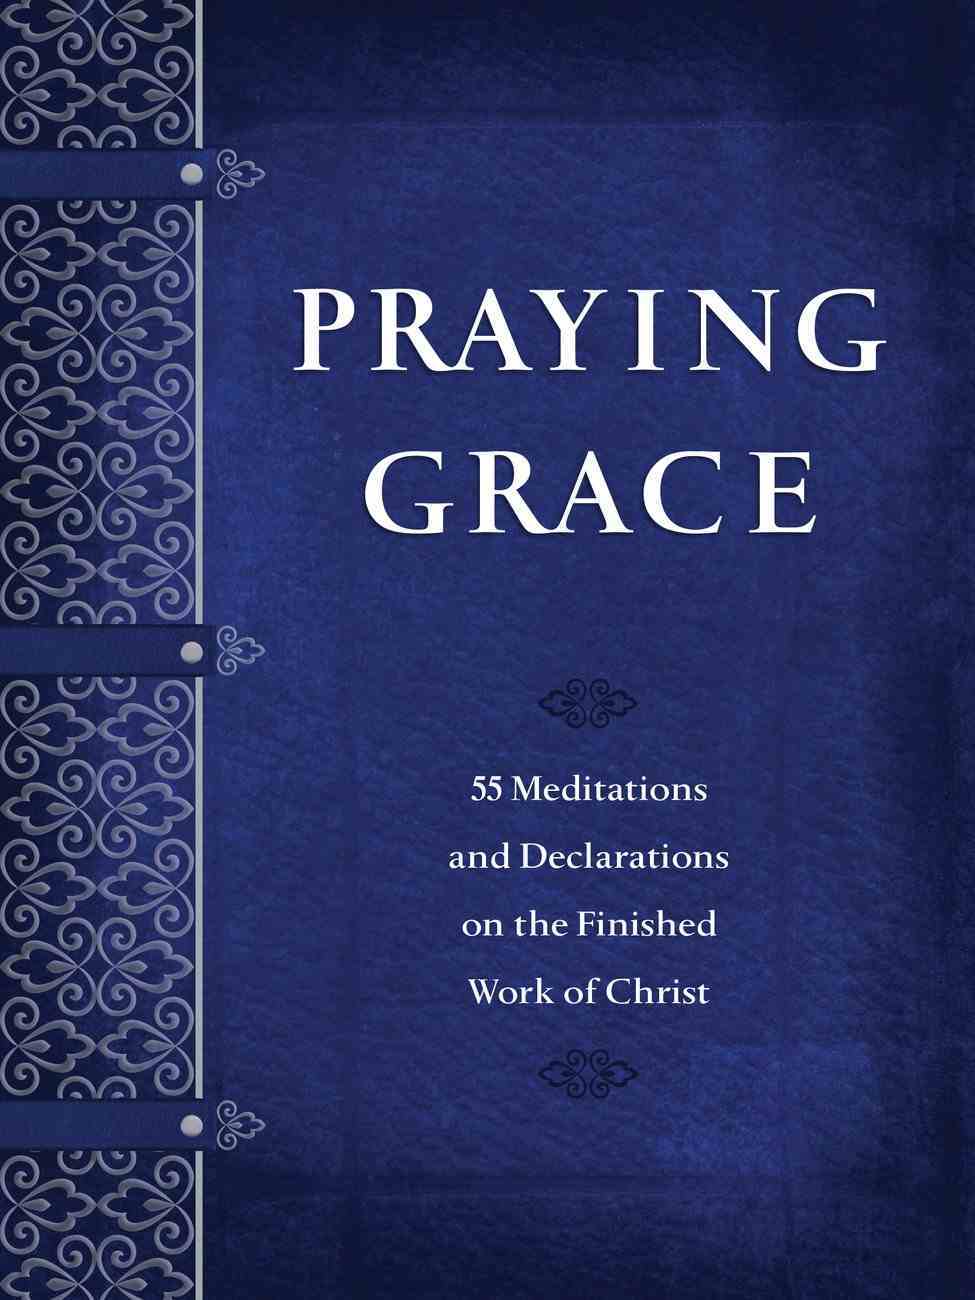 Praying Grace: 55 Meditations and Declarations on the Finished Work of Christ Paperback